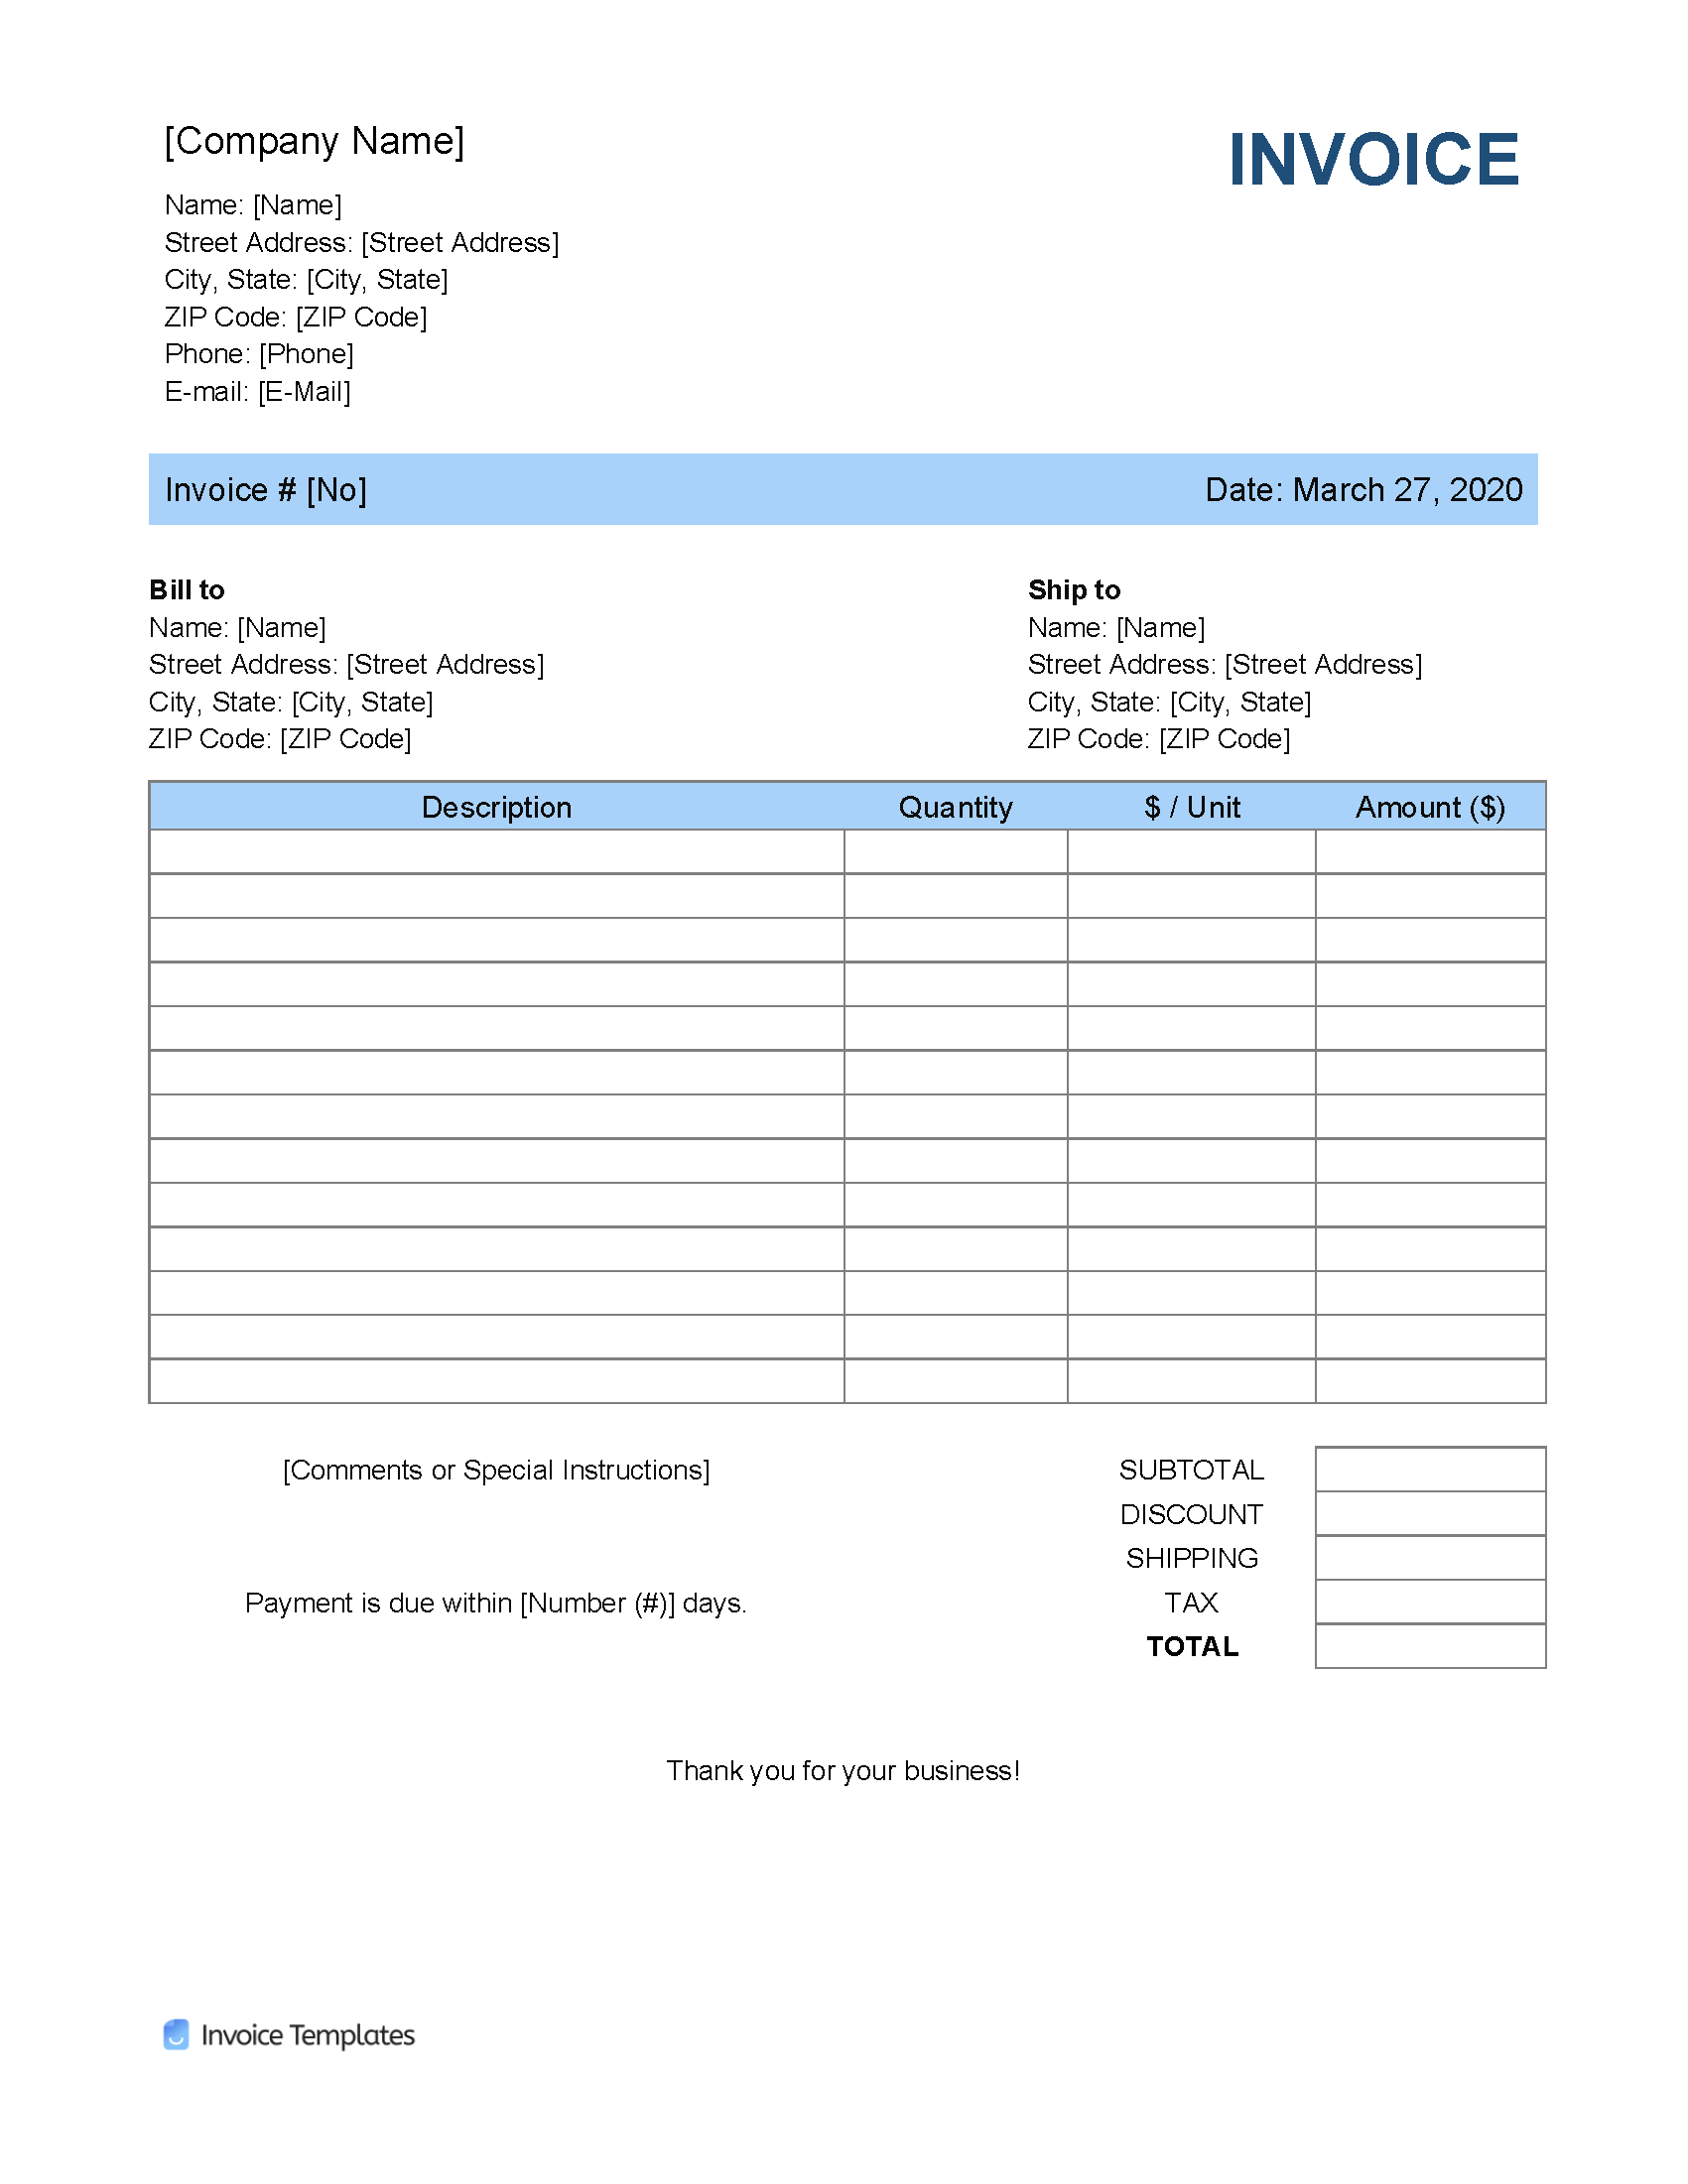 Billing Invoice Template Word from invoicetemplates.com